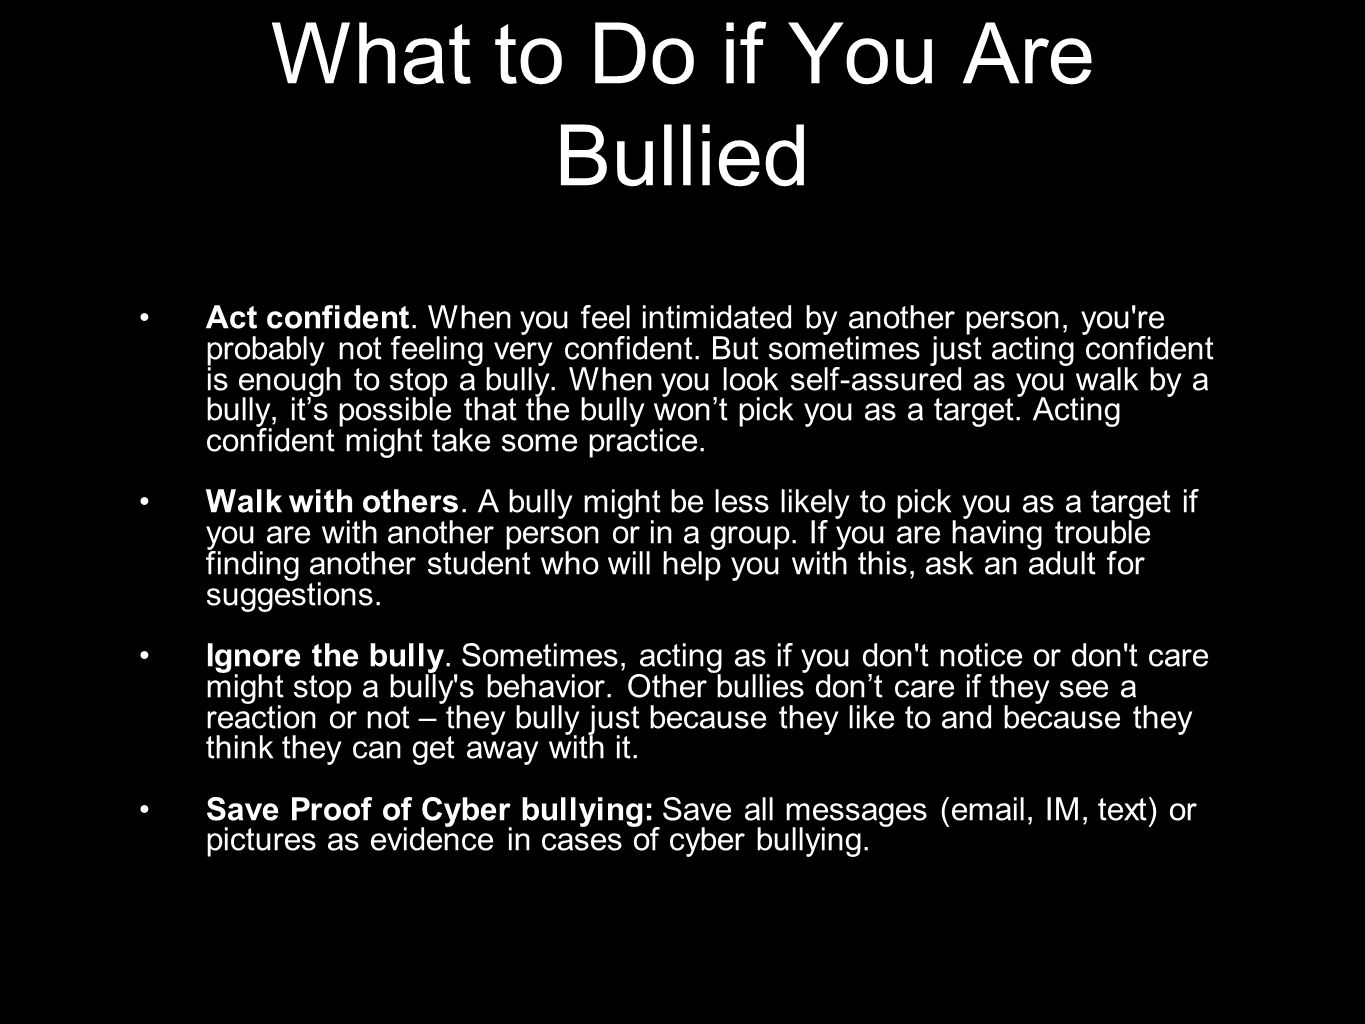 What to Do if You Are Bullied